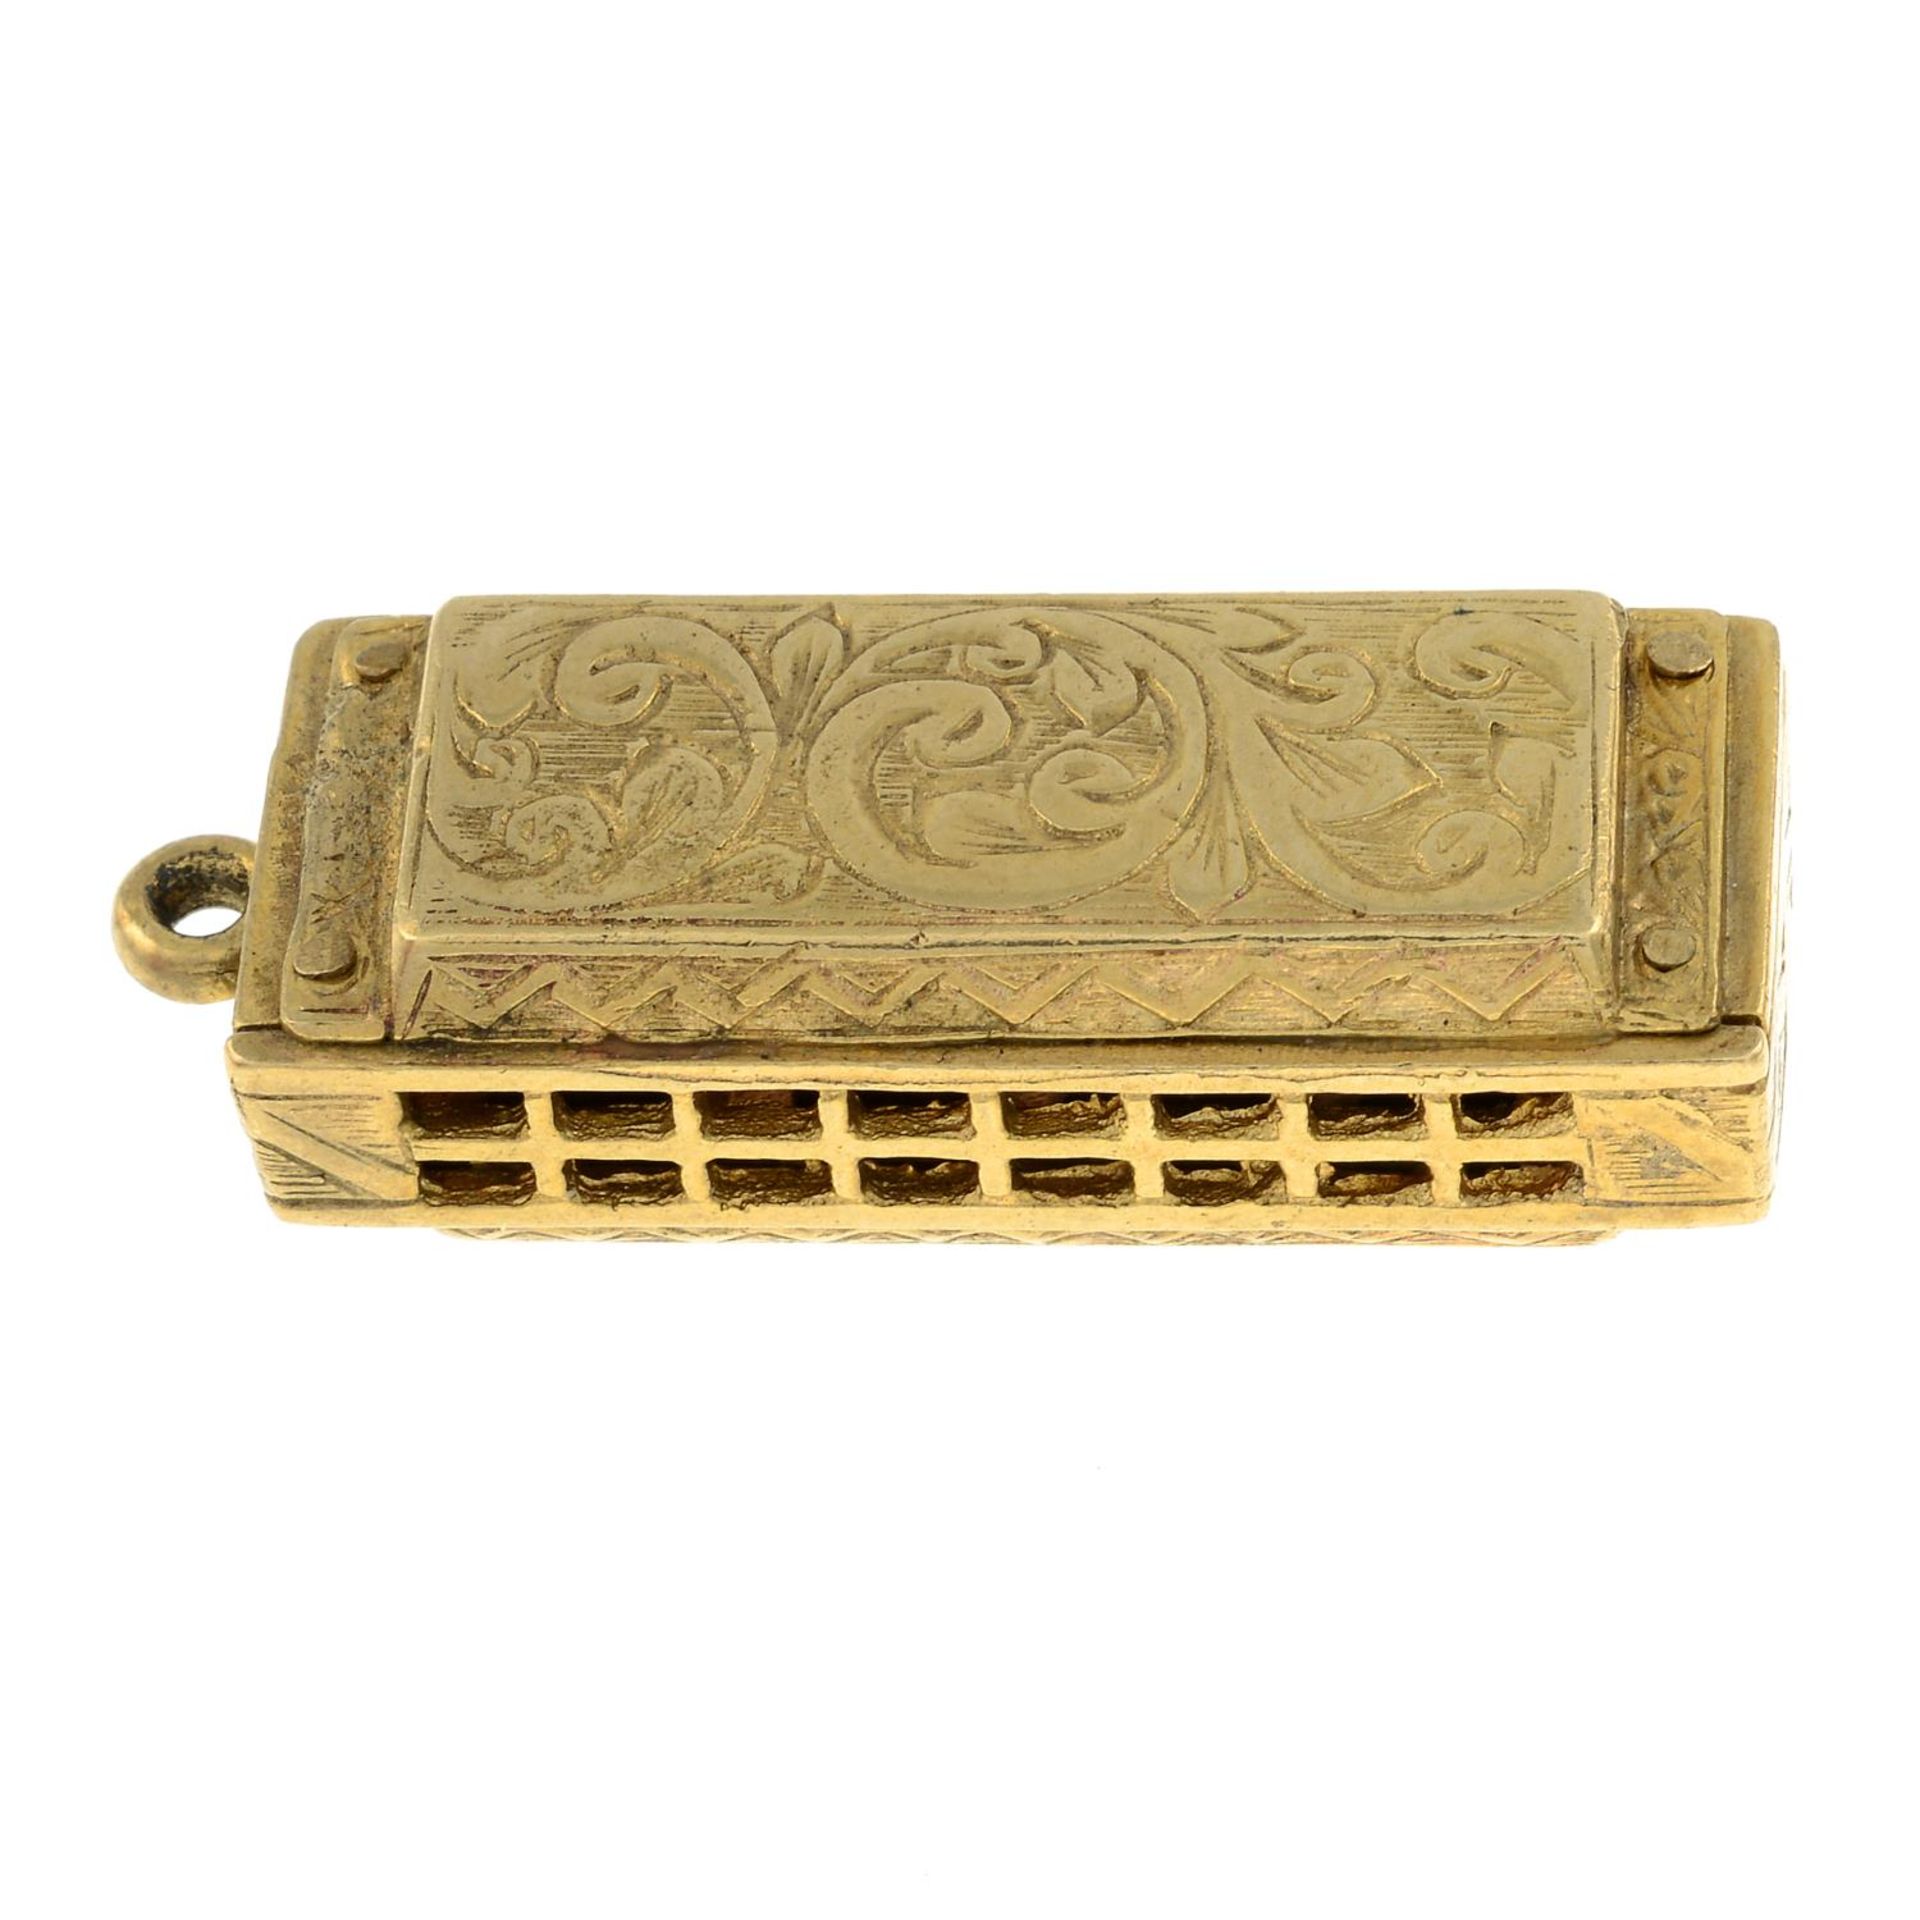 A 9ct gold harmonica pendant.Hallmarks for 9ct gold. - Image 2 of 2